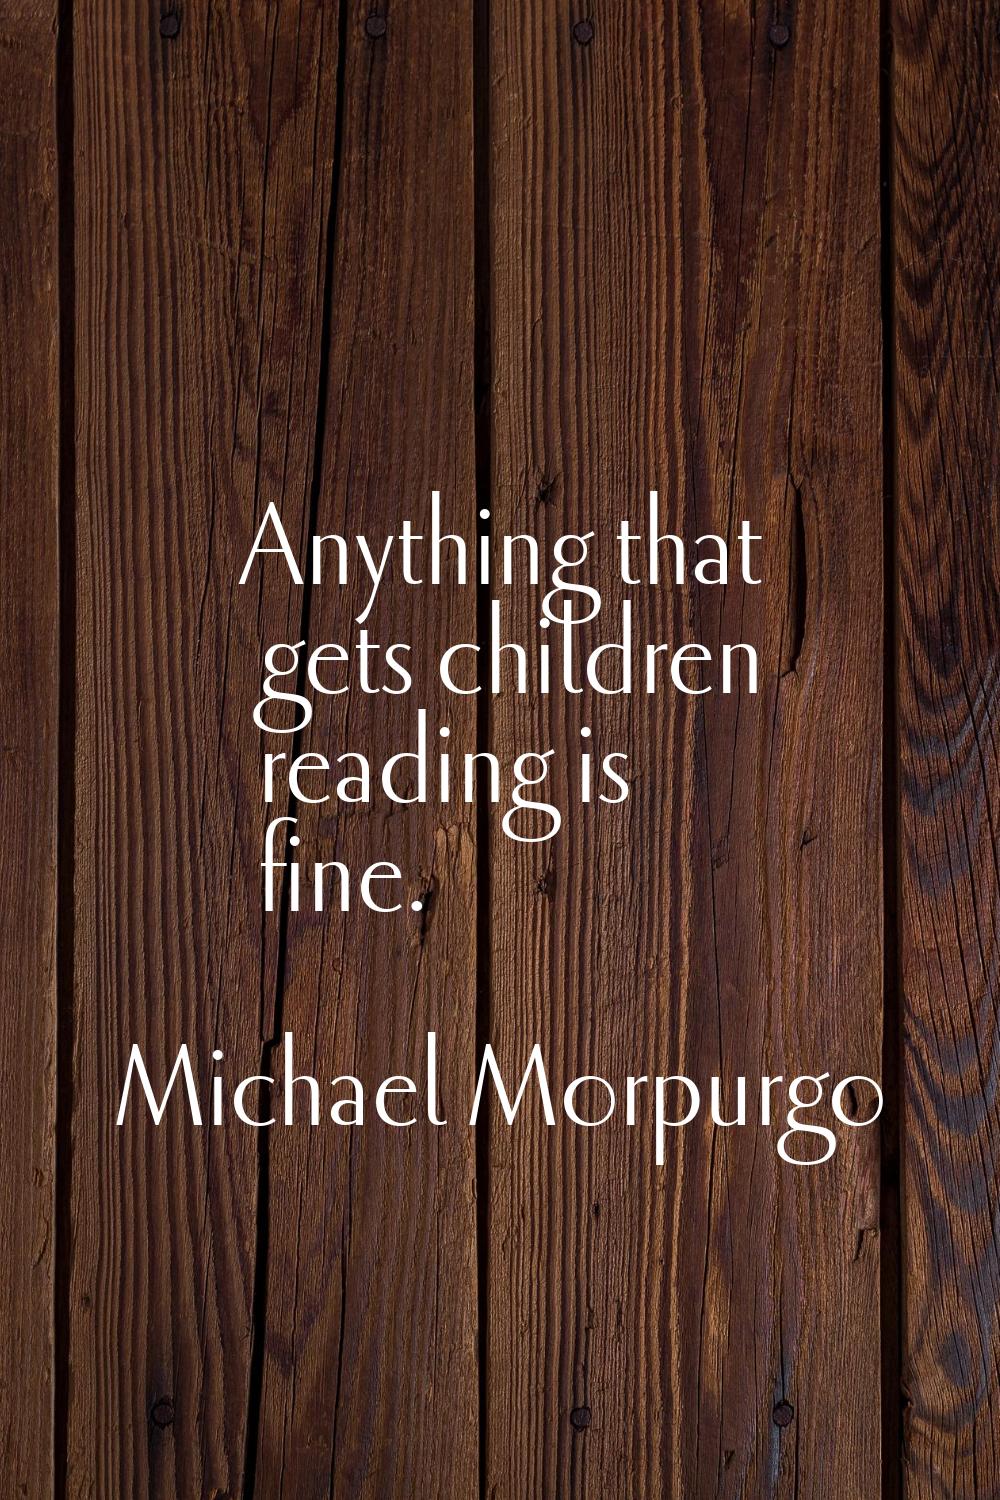 Anything that gets children reading is fine.